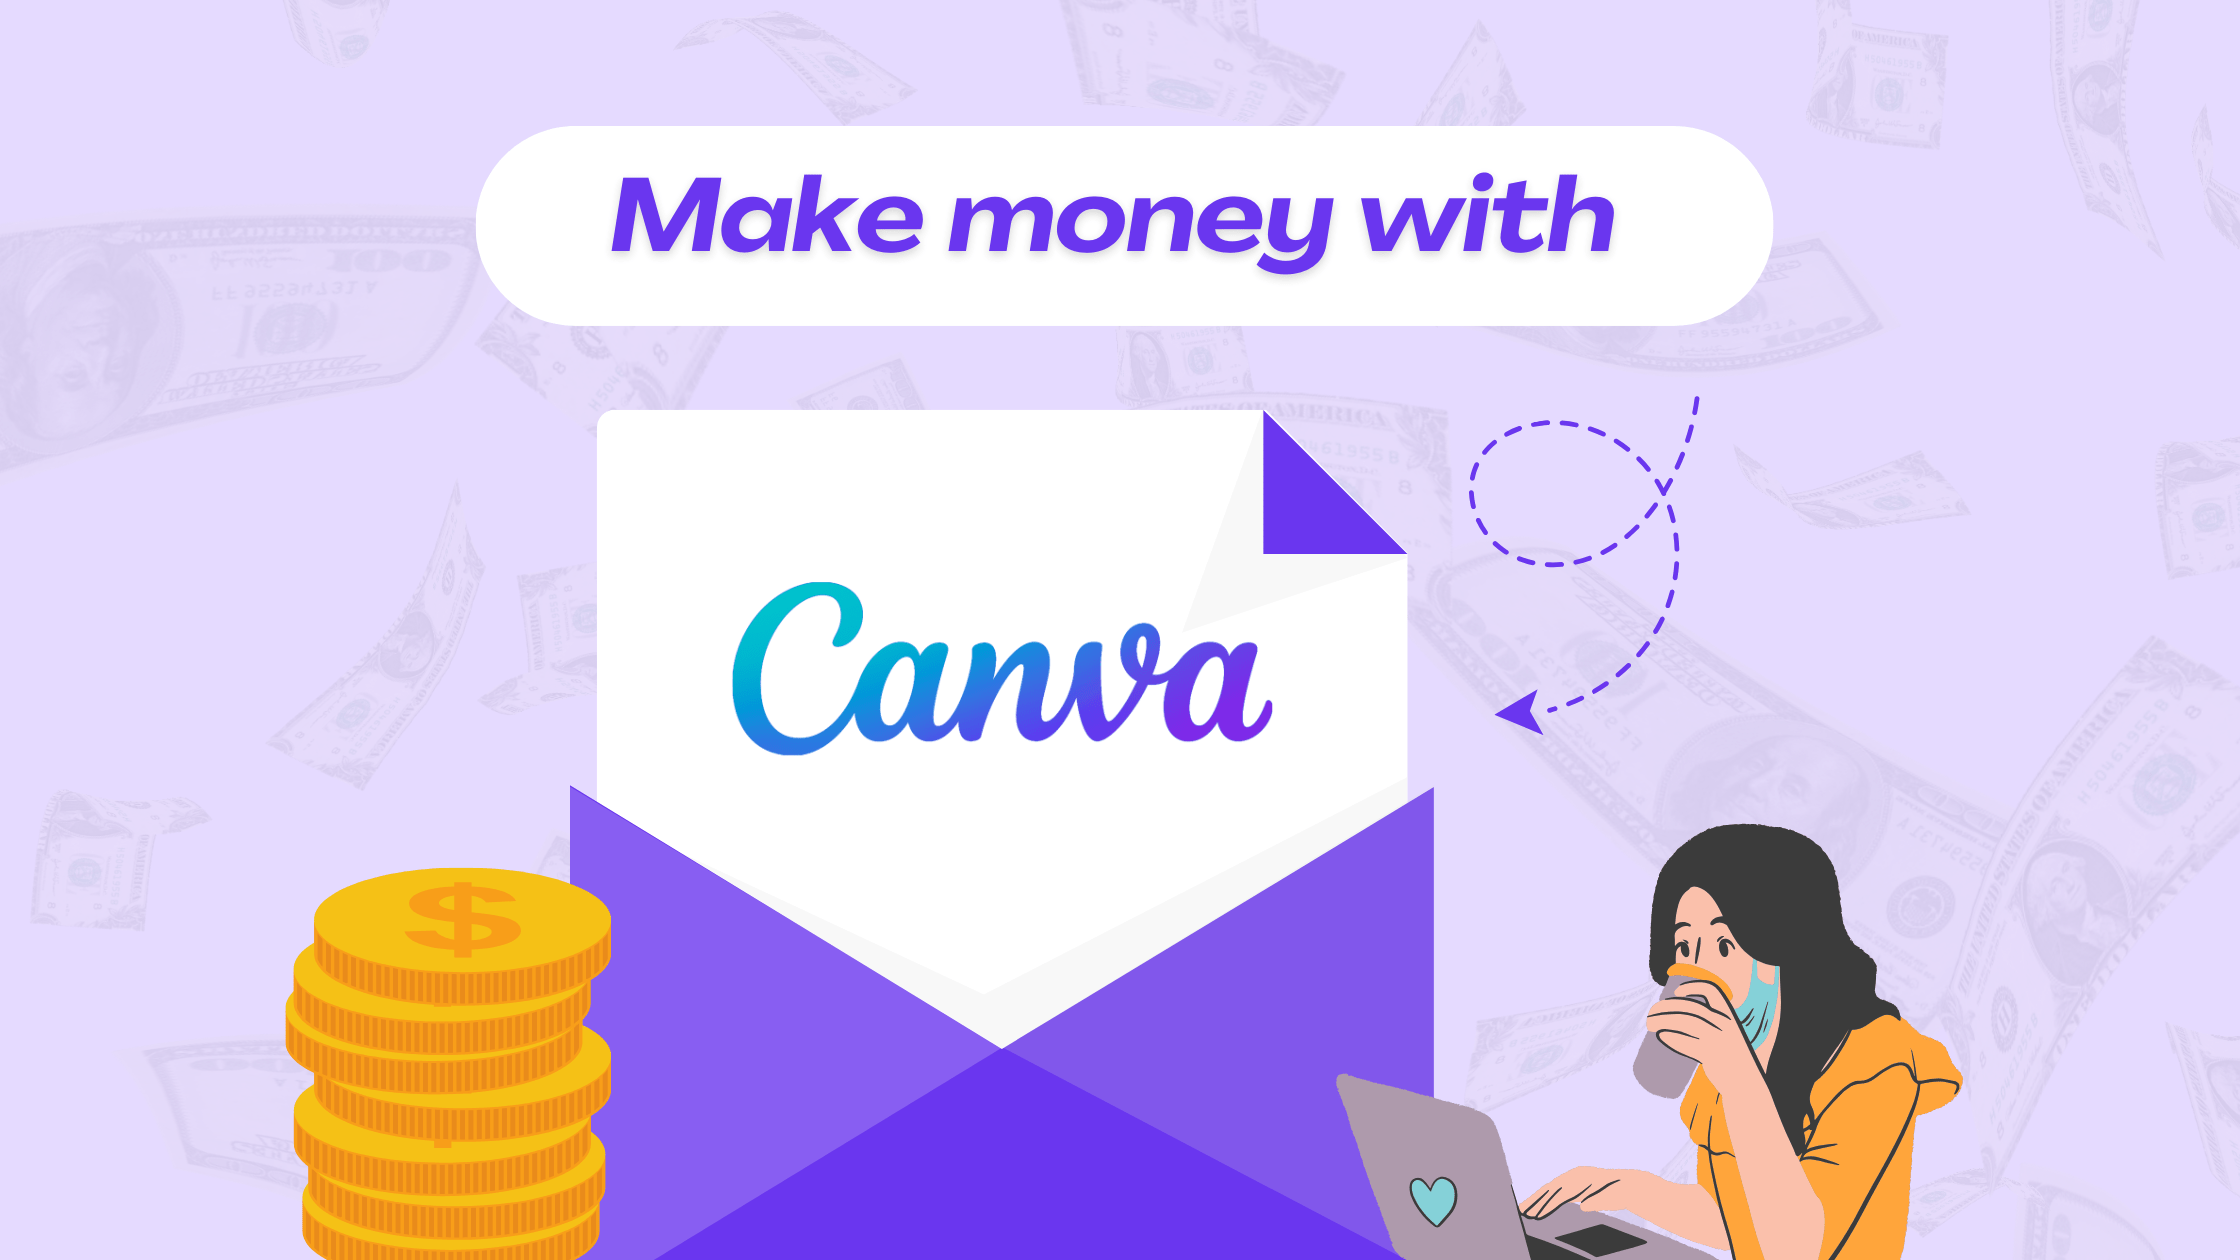 How to earn from Canva